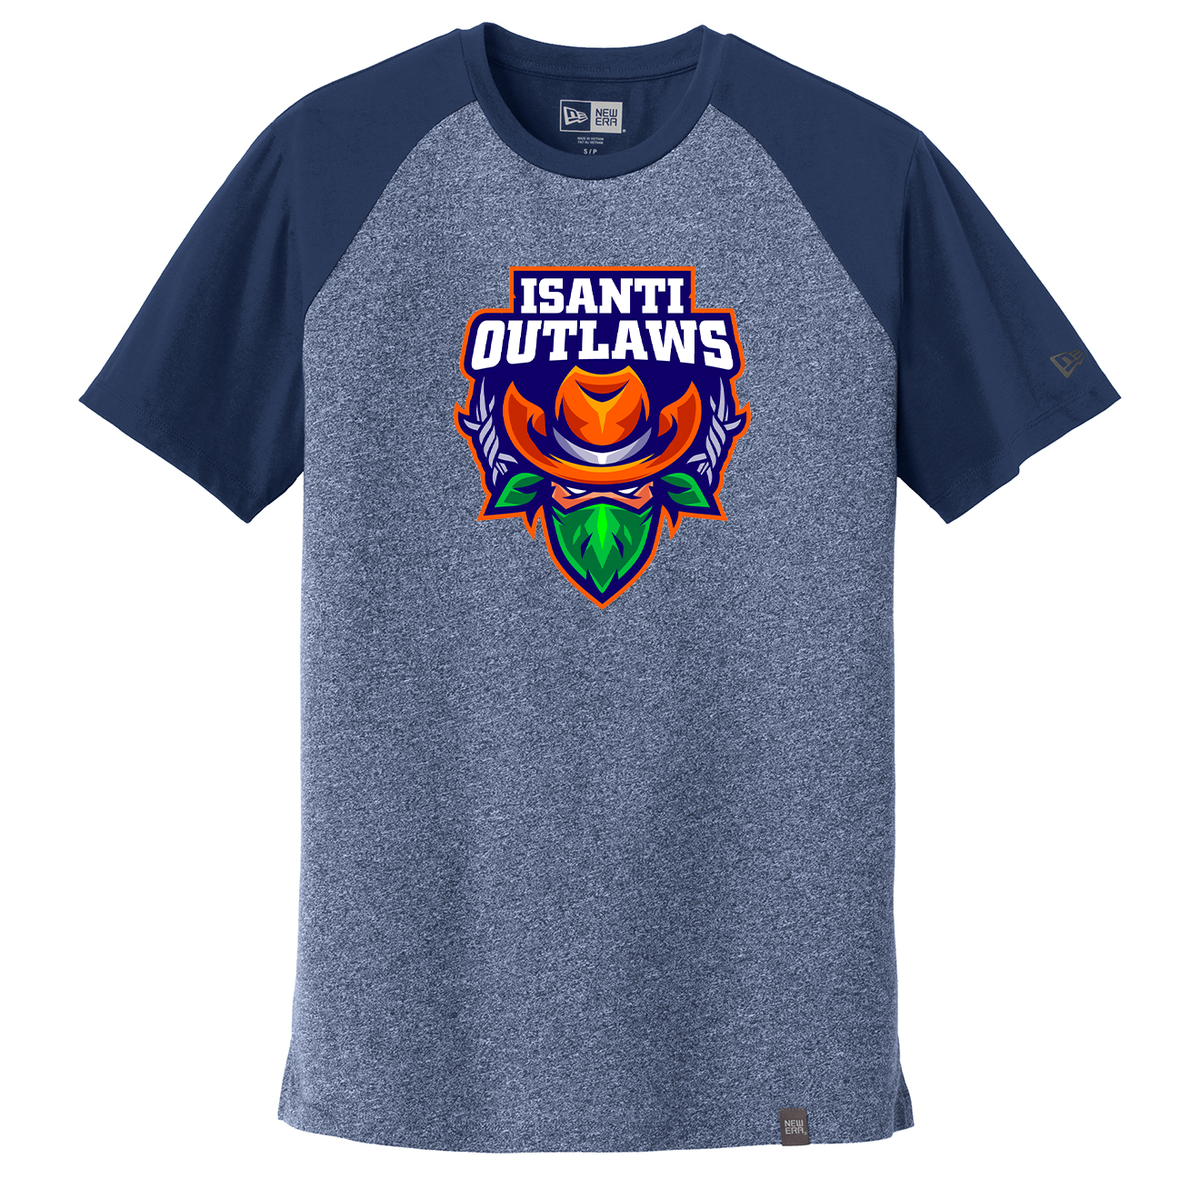 Isanti Outlaws Heritage Blend Tee